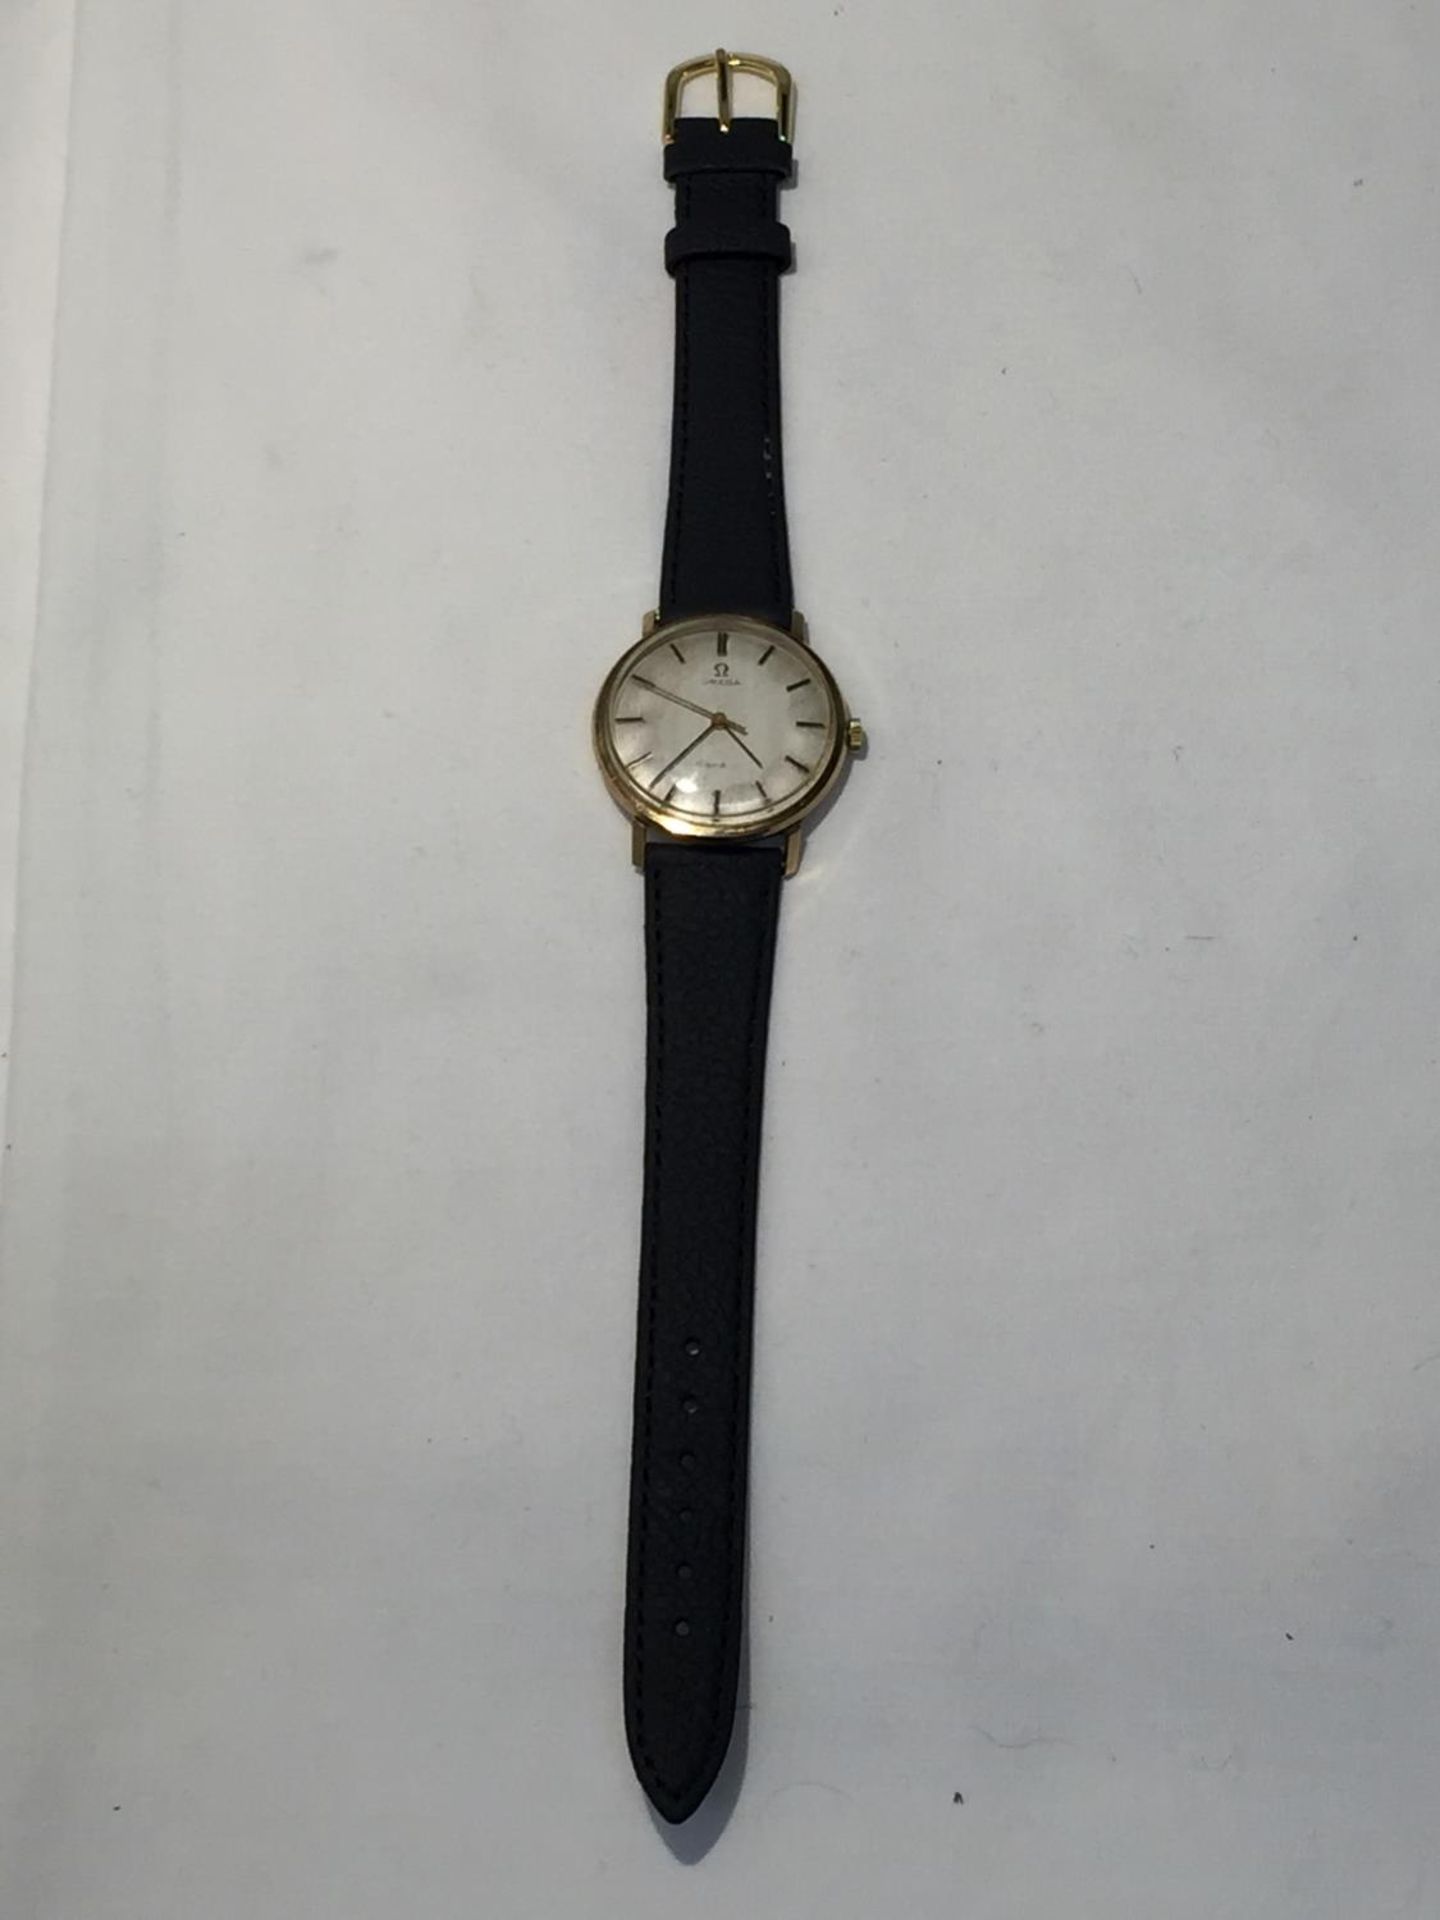 AN OMEGA GENTLEMAN'S WRIST WATCH WITH 9 CARAT GOLD CASE AND LEATHER STRAP